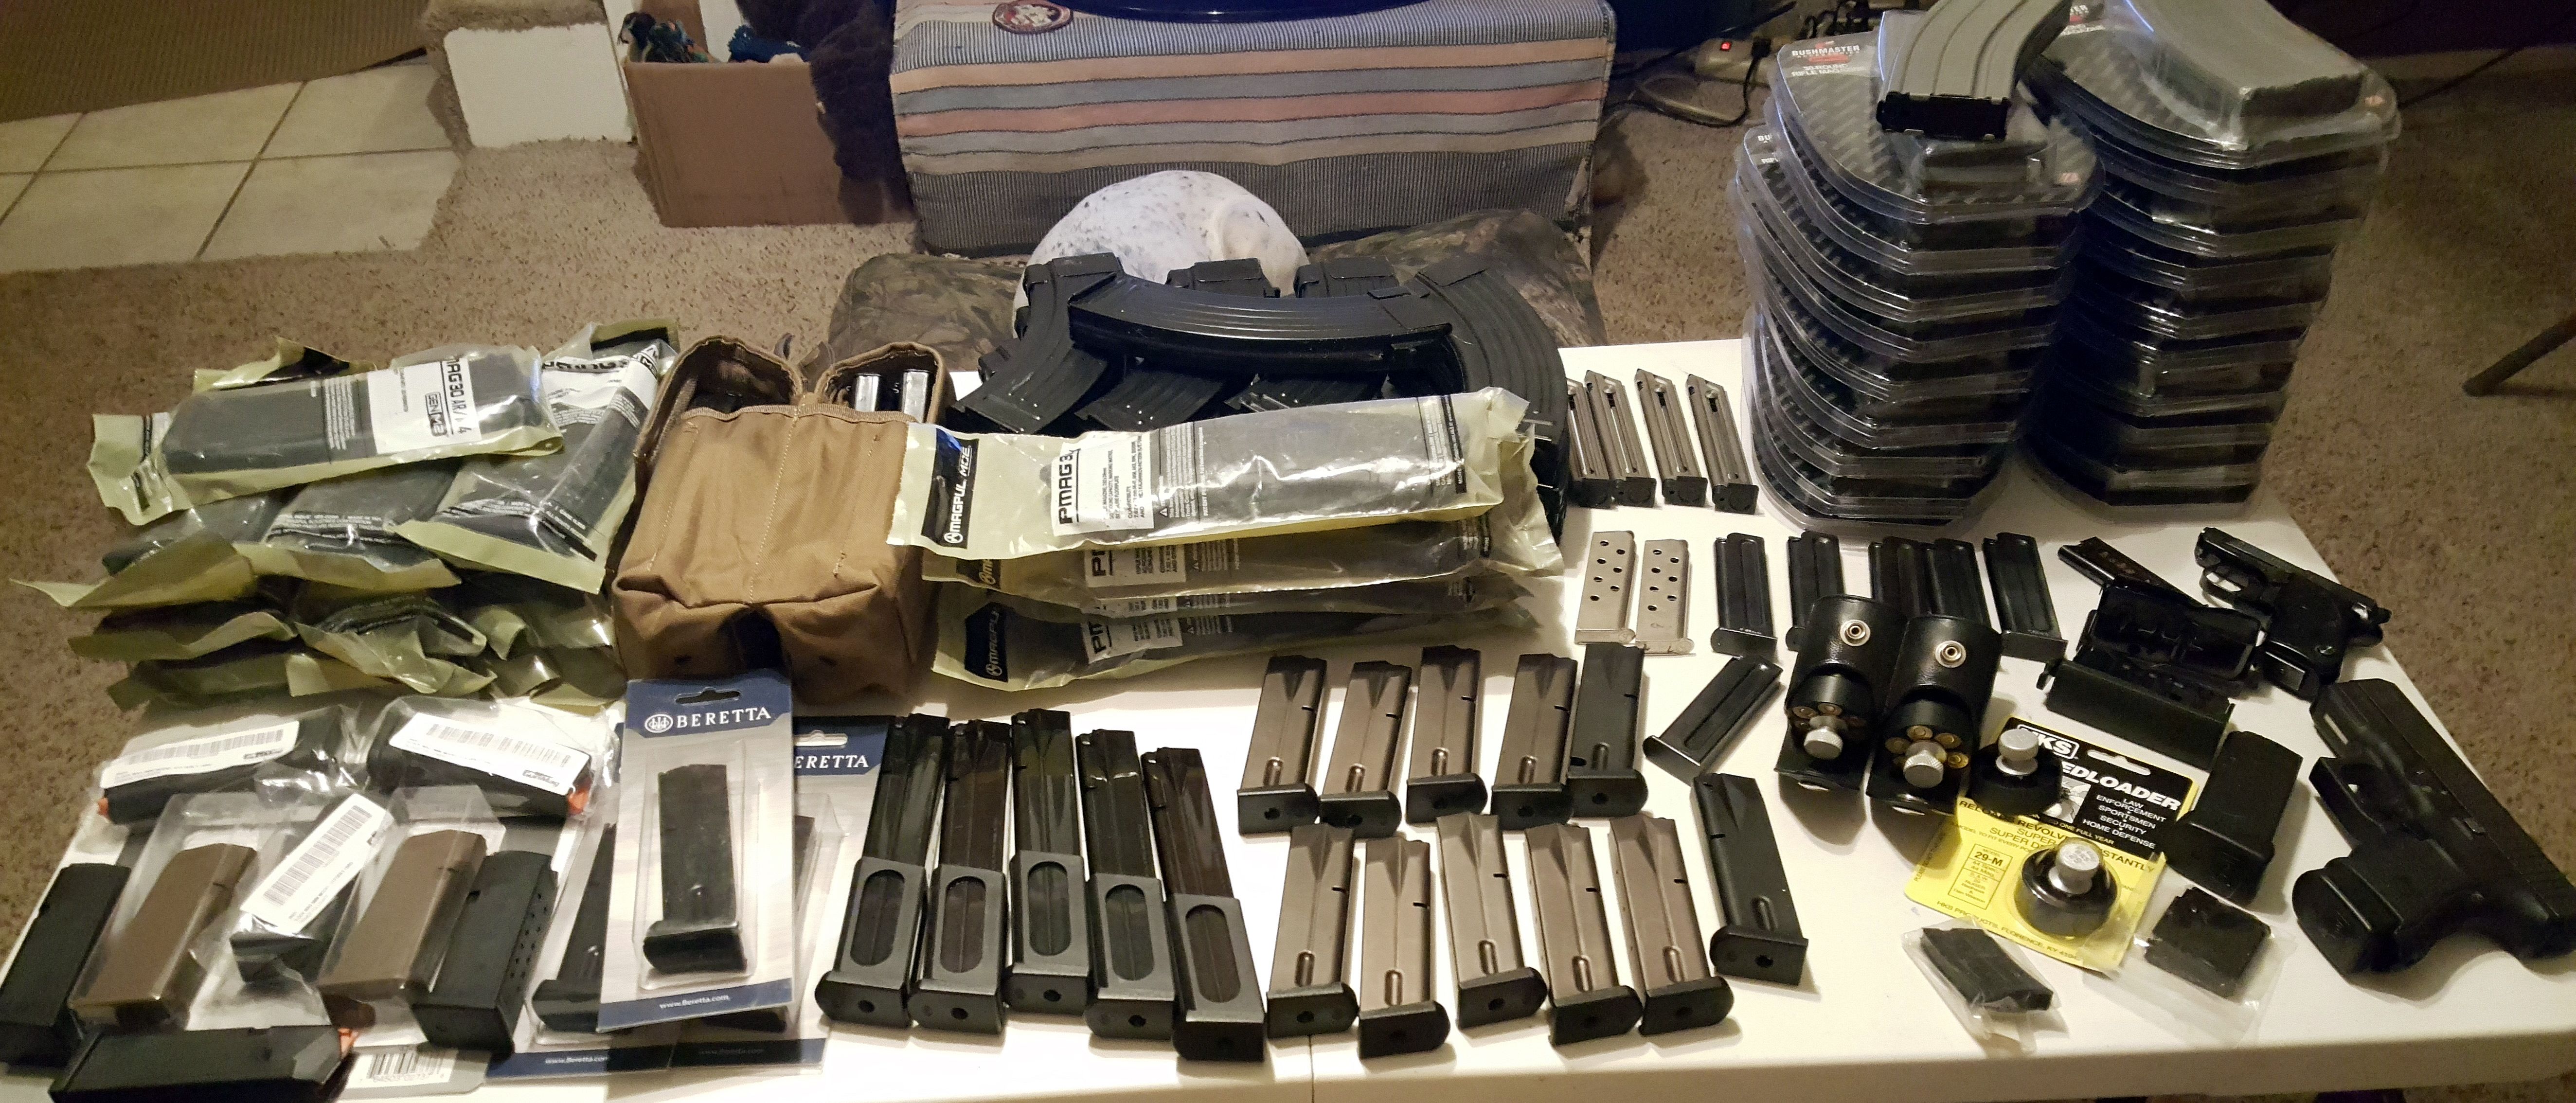 Most Mags At Apartment Not Including at least 1 AK & 4 AR mags with guns - side view.jpg